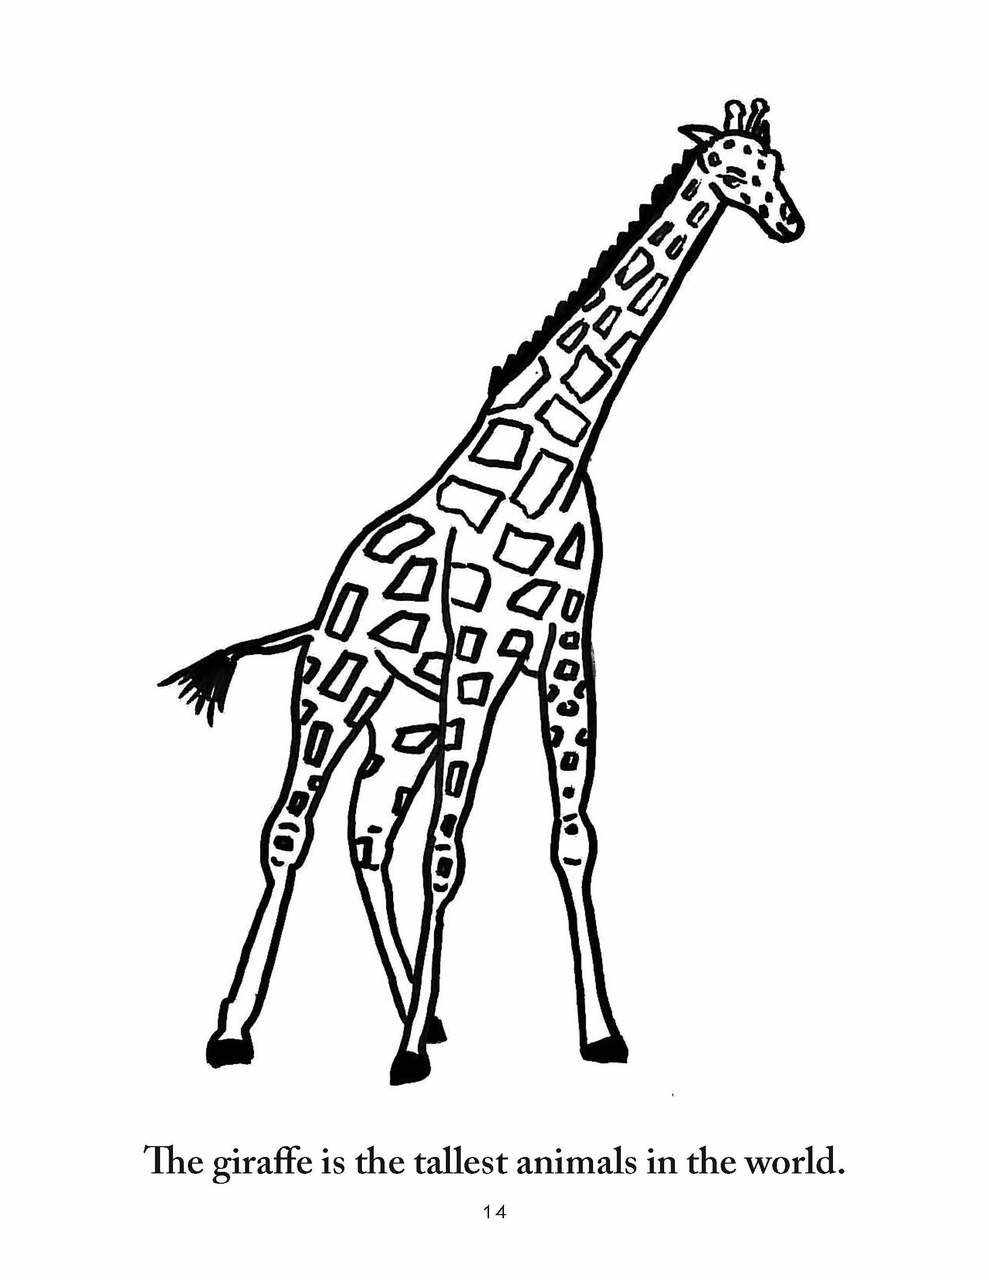 Download Zoology Coloring pages - elementalscience.com